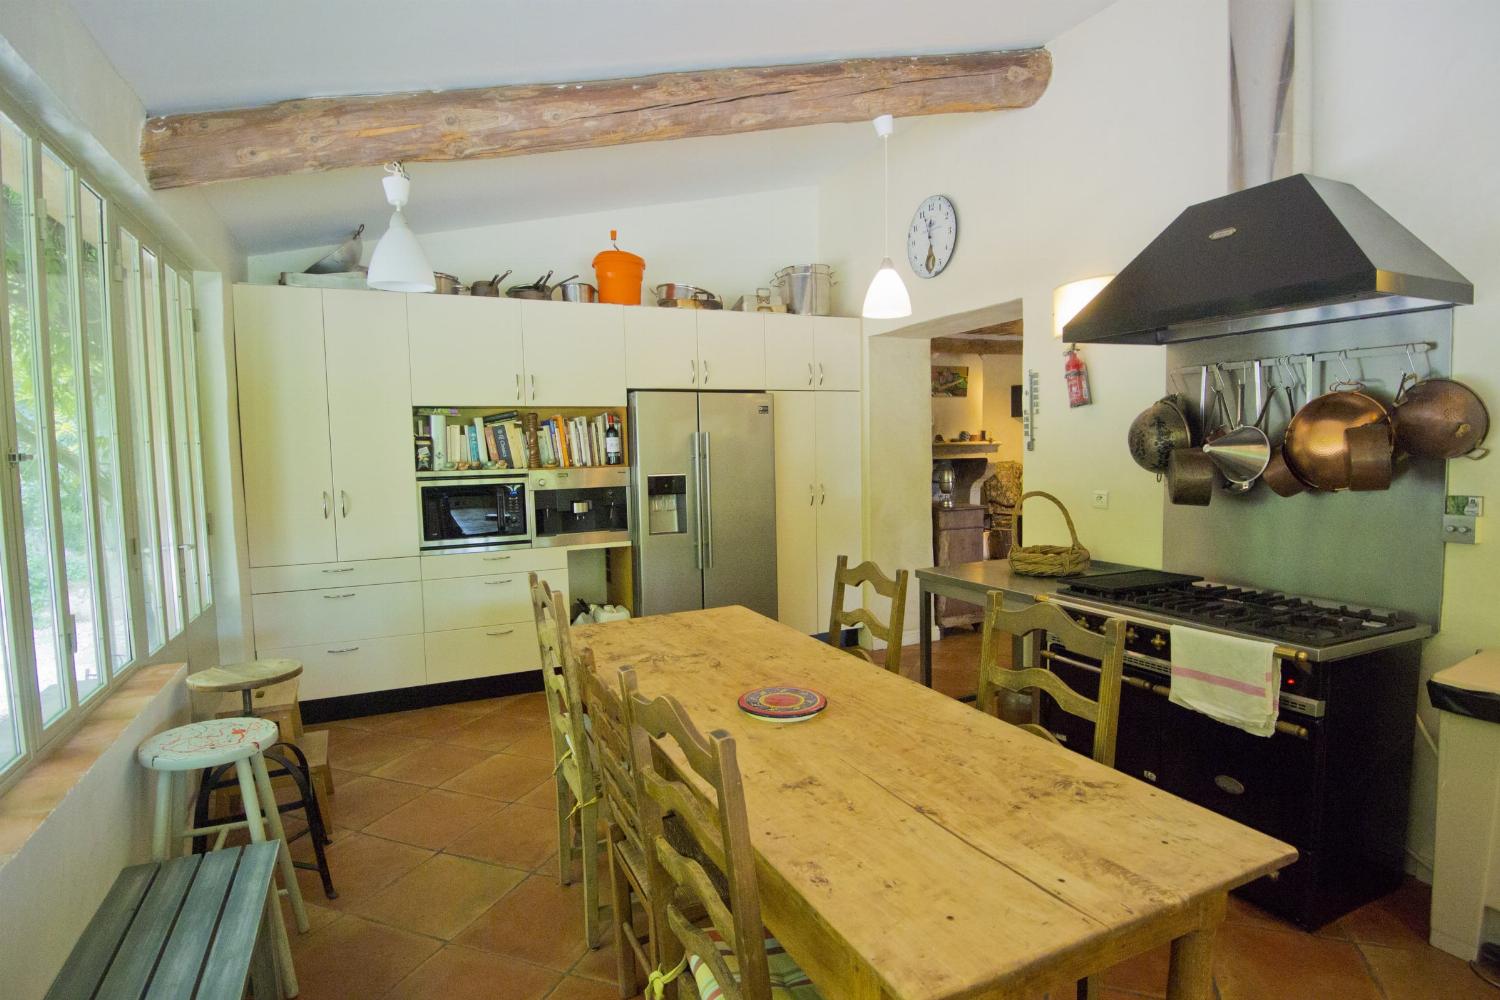 Kitchen | Rental home in Provence